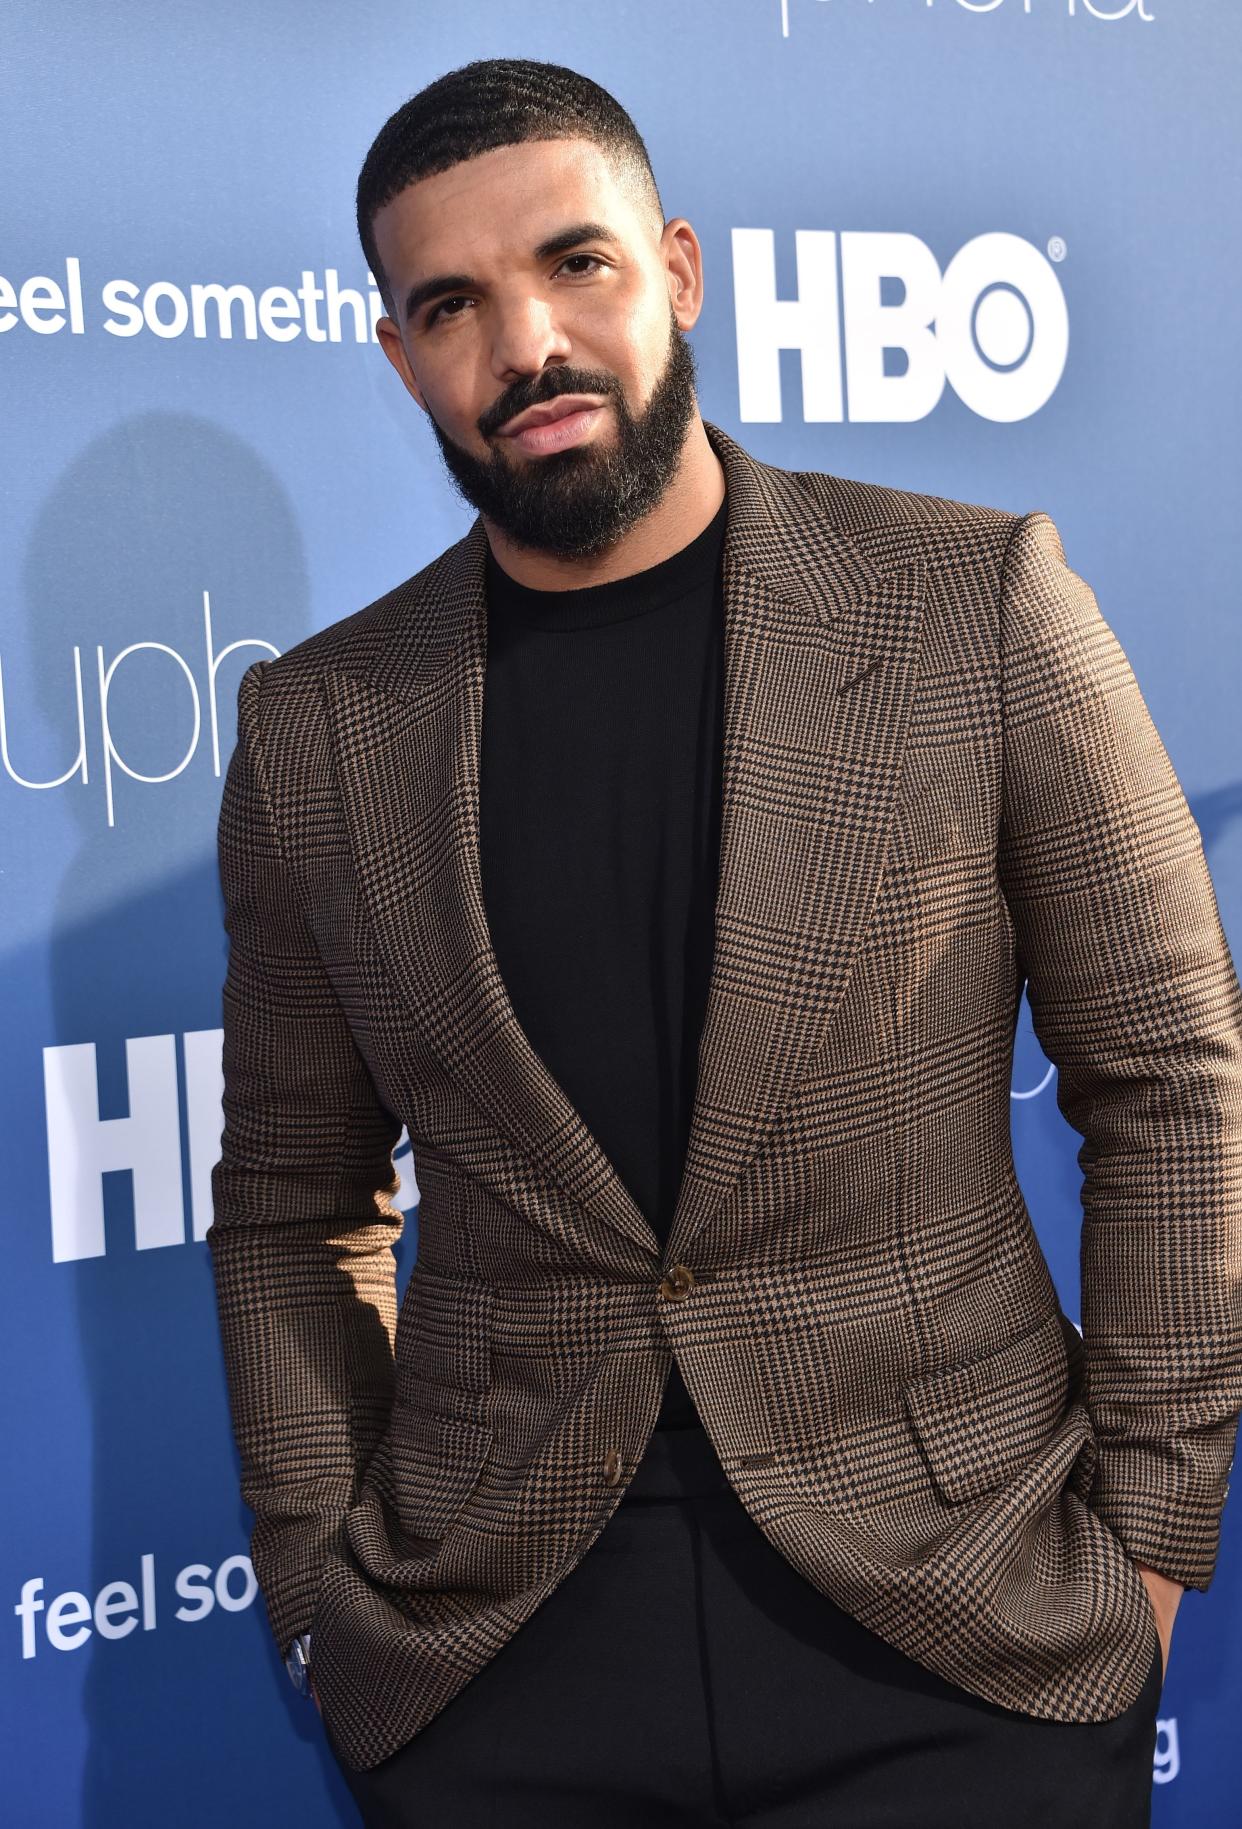 Drake serves as one of the executive producers of HBO teen drama "Euphoria."